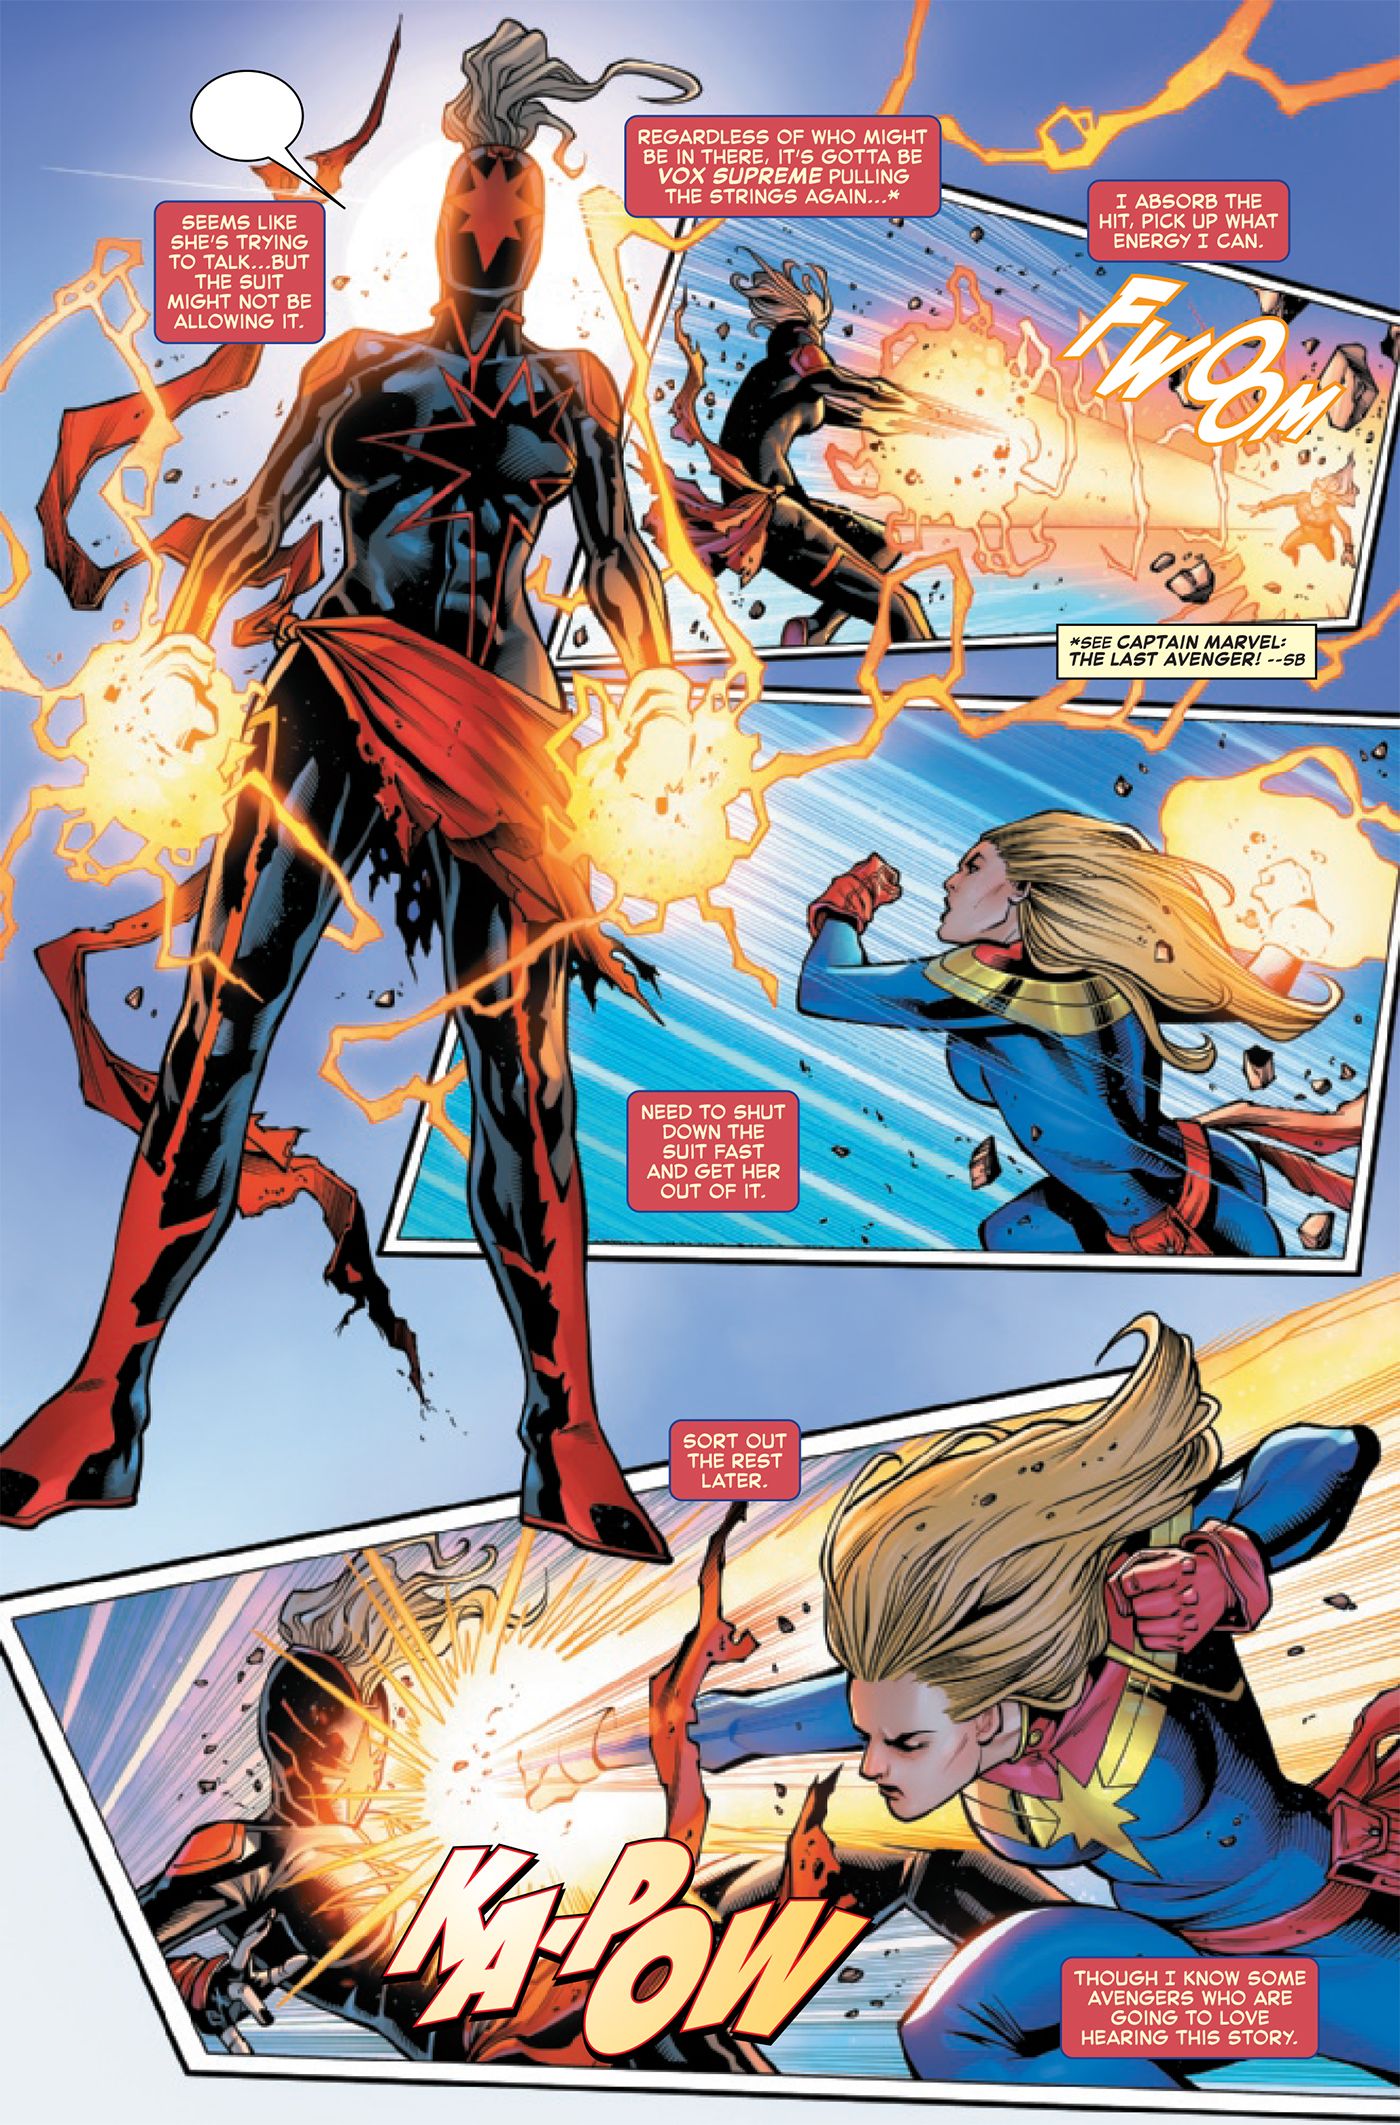 Captain Marvel squares off against the new host of the Last Avenger suit.